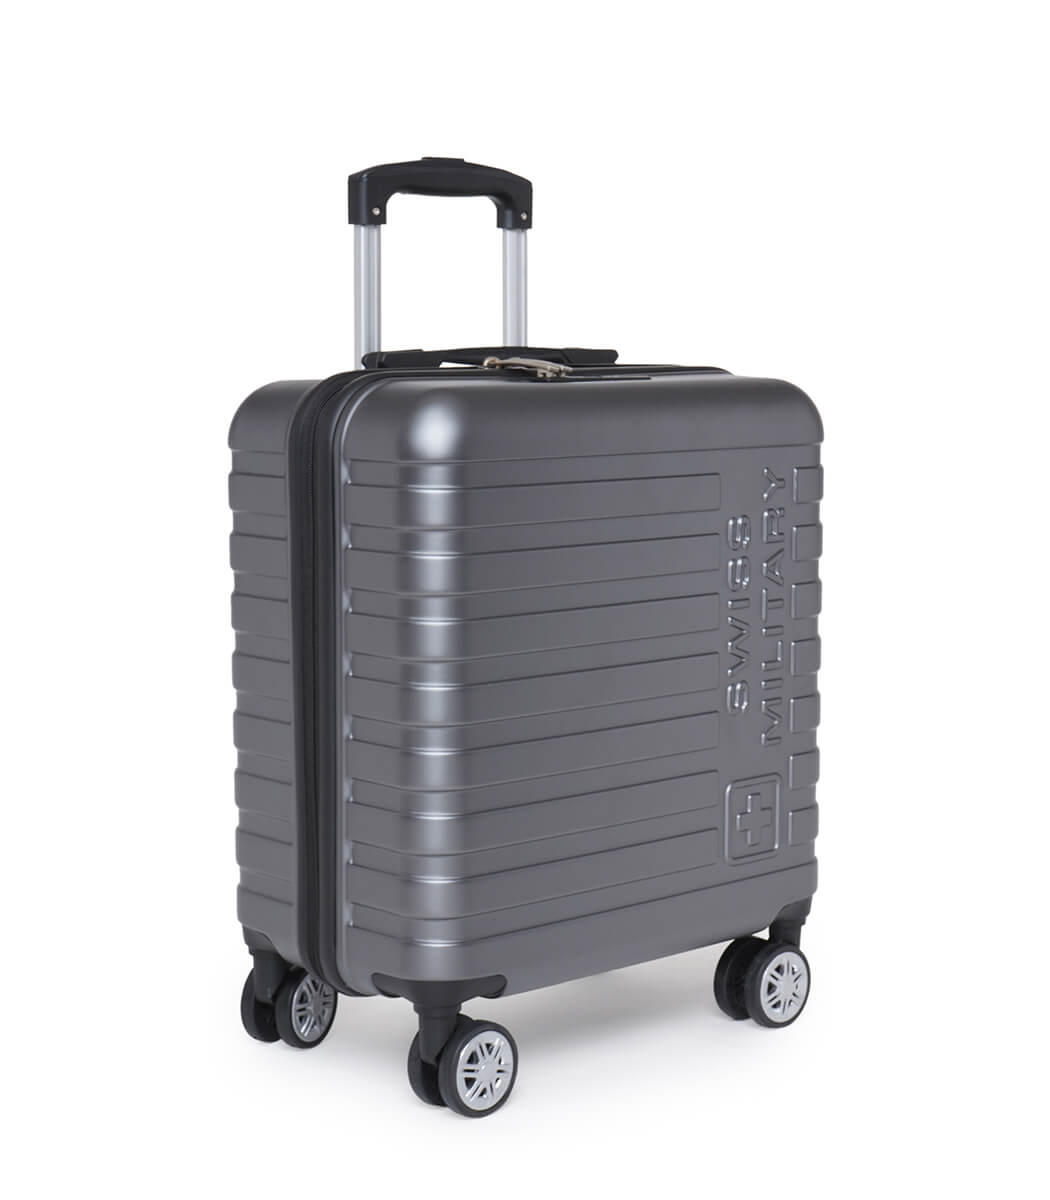  travel in style with the Dapper Hard Trolley Overnighter With 8 wheels for smooth maneuvering